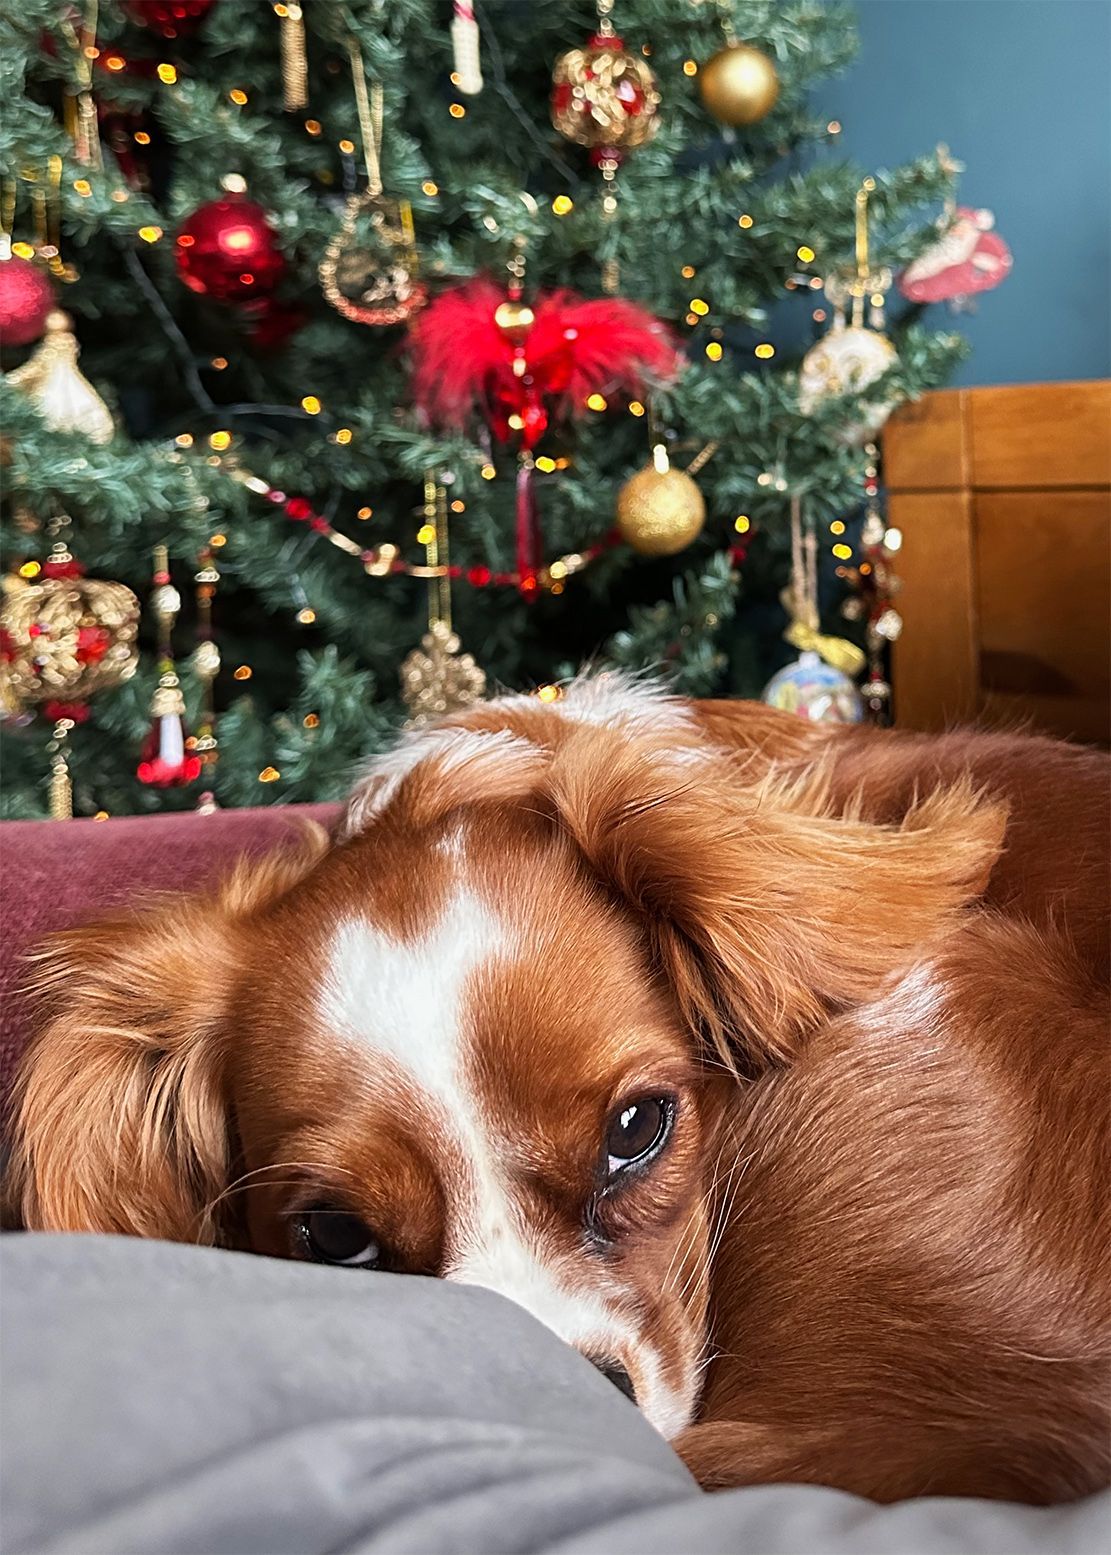 Small dog curled up in the sofa looking out of the image. In the background we see a decorated Christmas tree